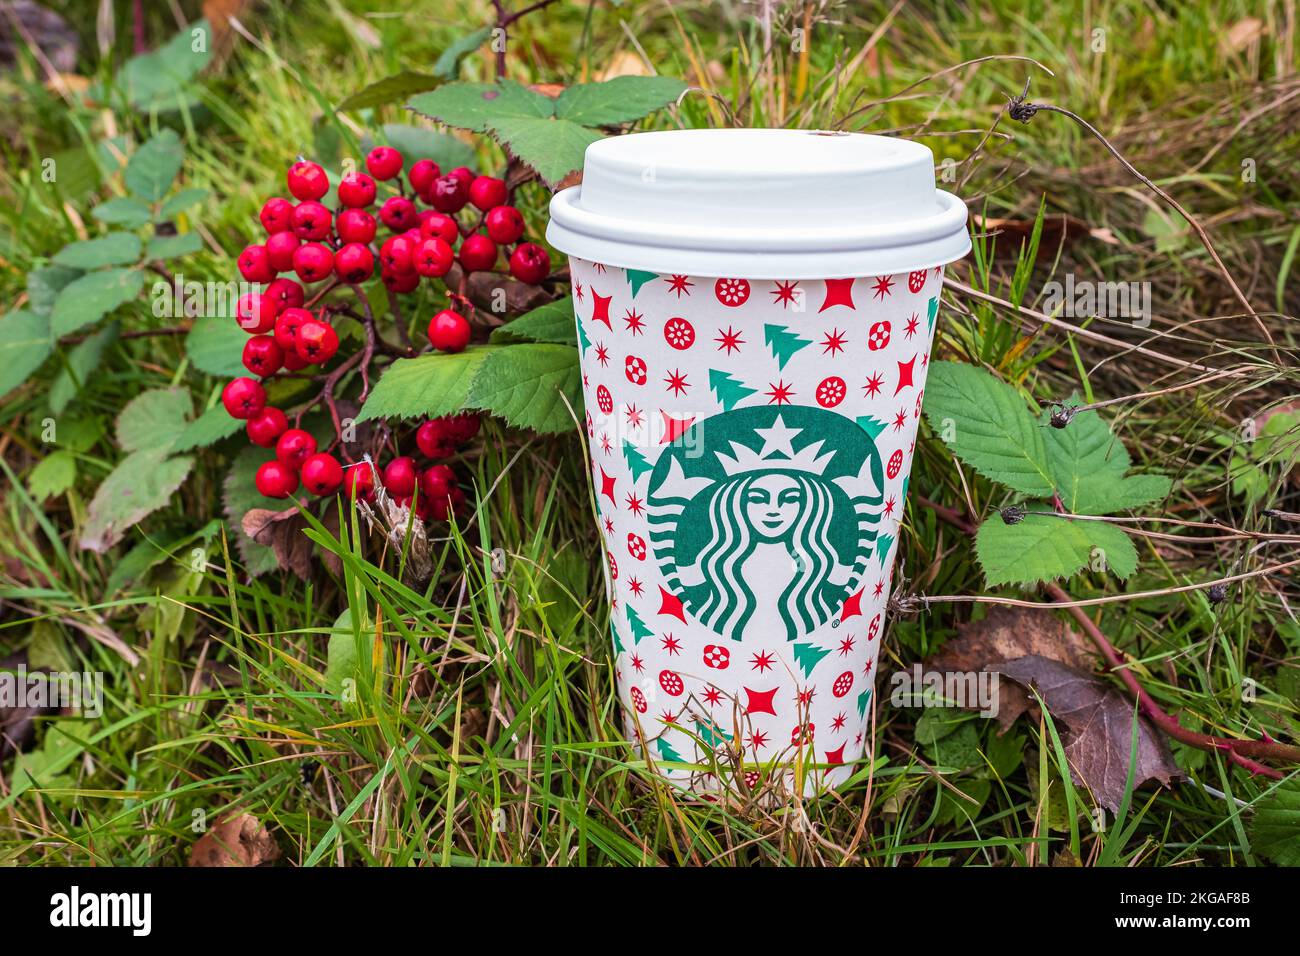 A tall Starbucks coffee with green natural background. Starbucks is the world's largest coffee house with over 20,000 stores in 61 countries. Sustaina Stock Photo